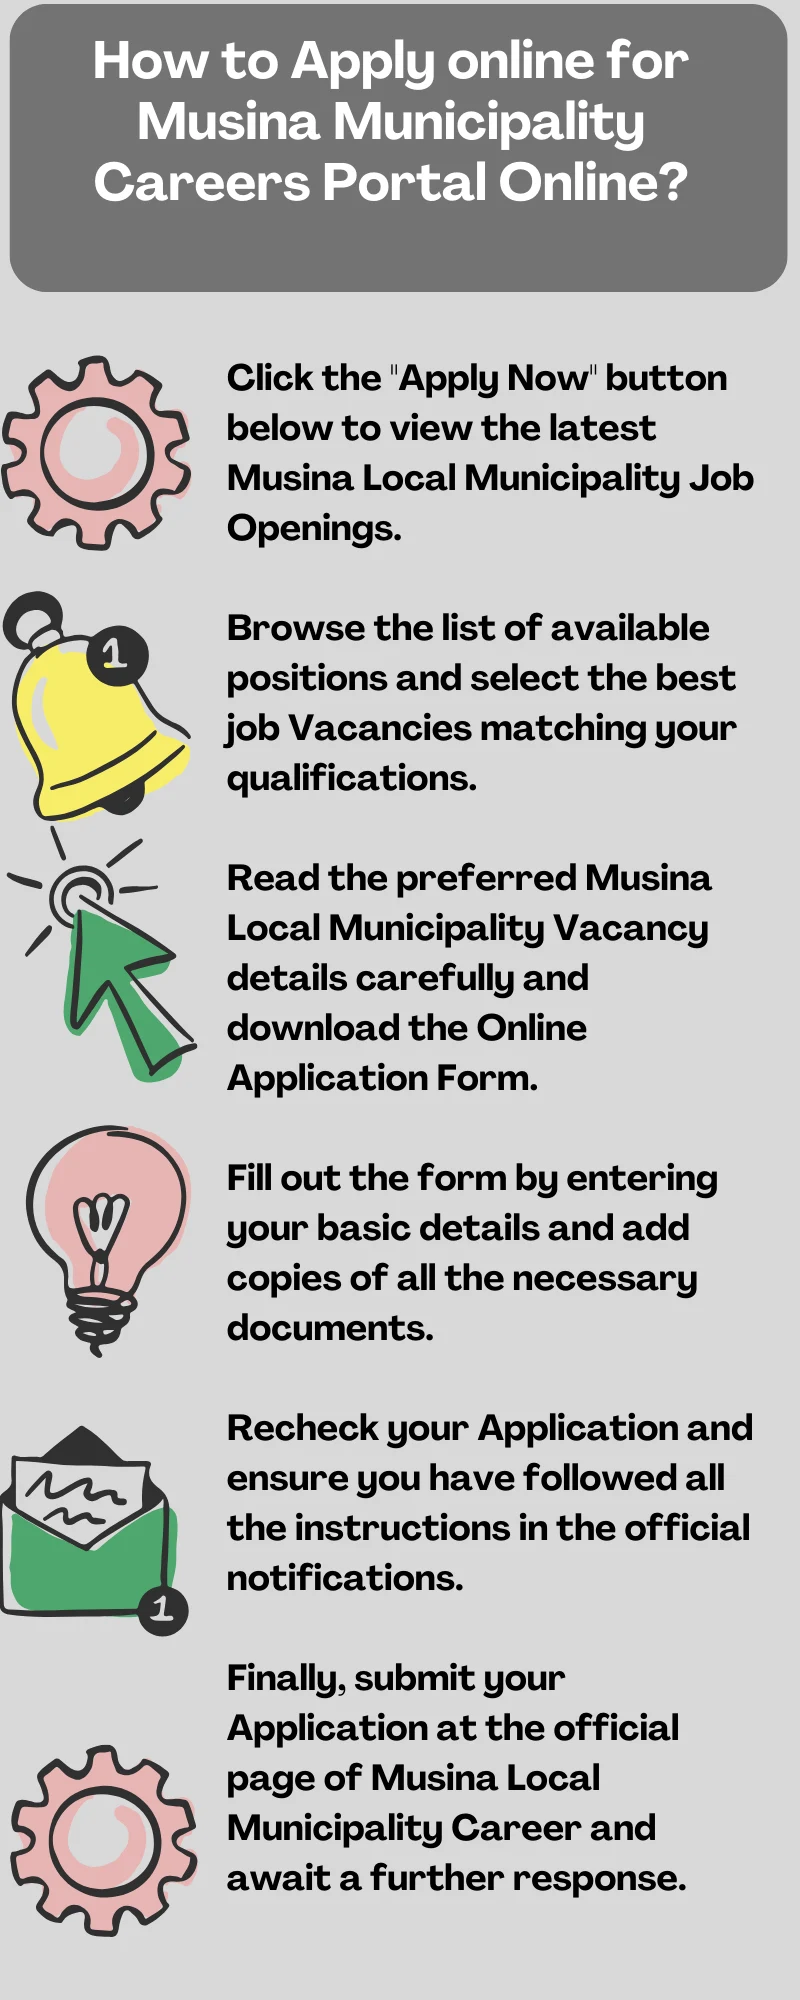 How to Apply online for Musina Municipality Careers Portal Online?